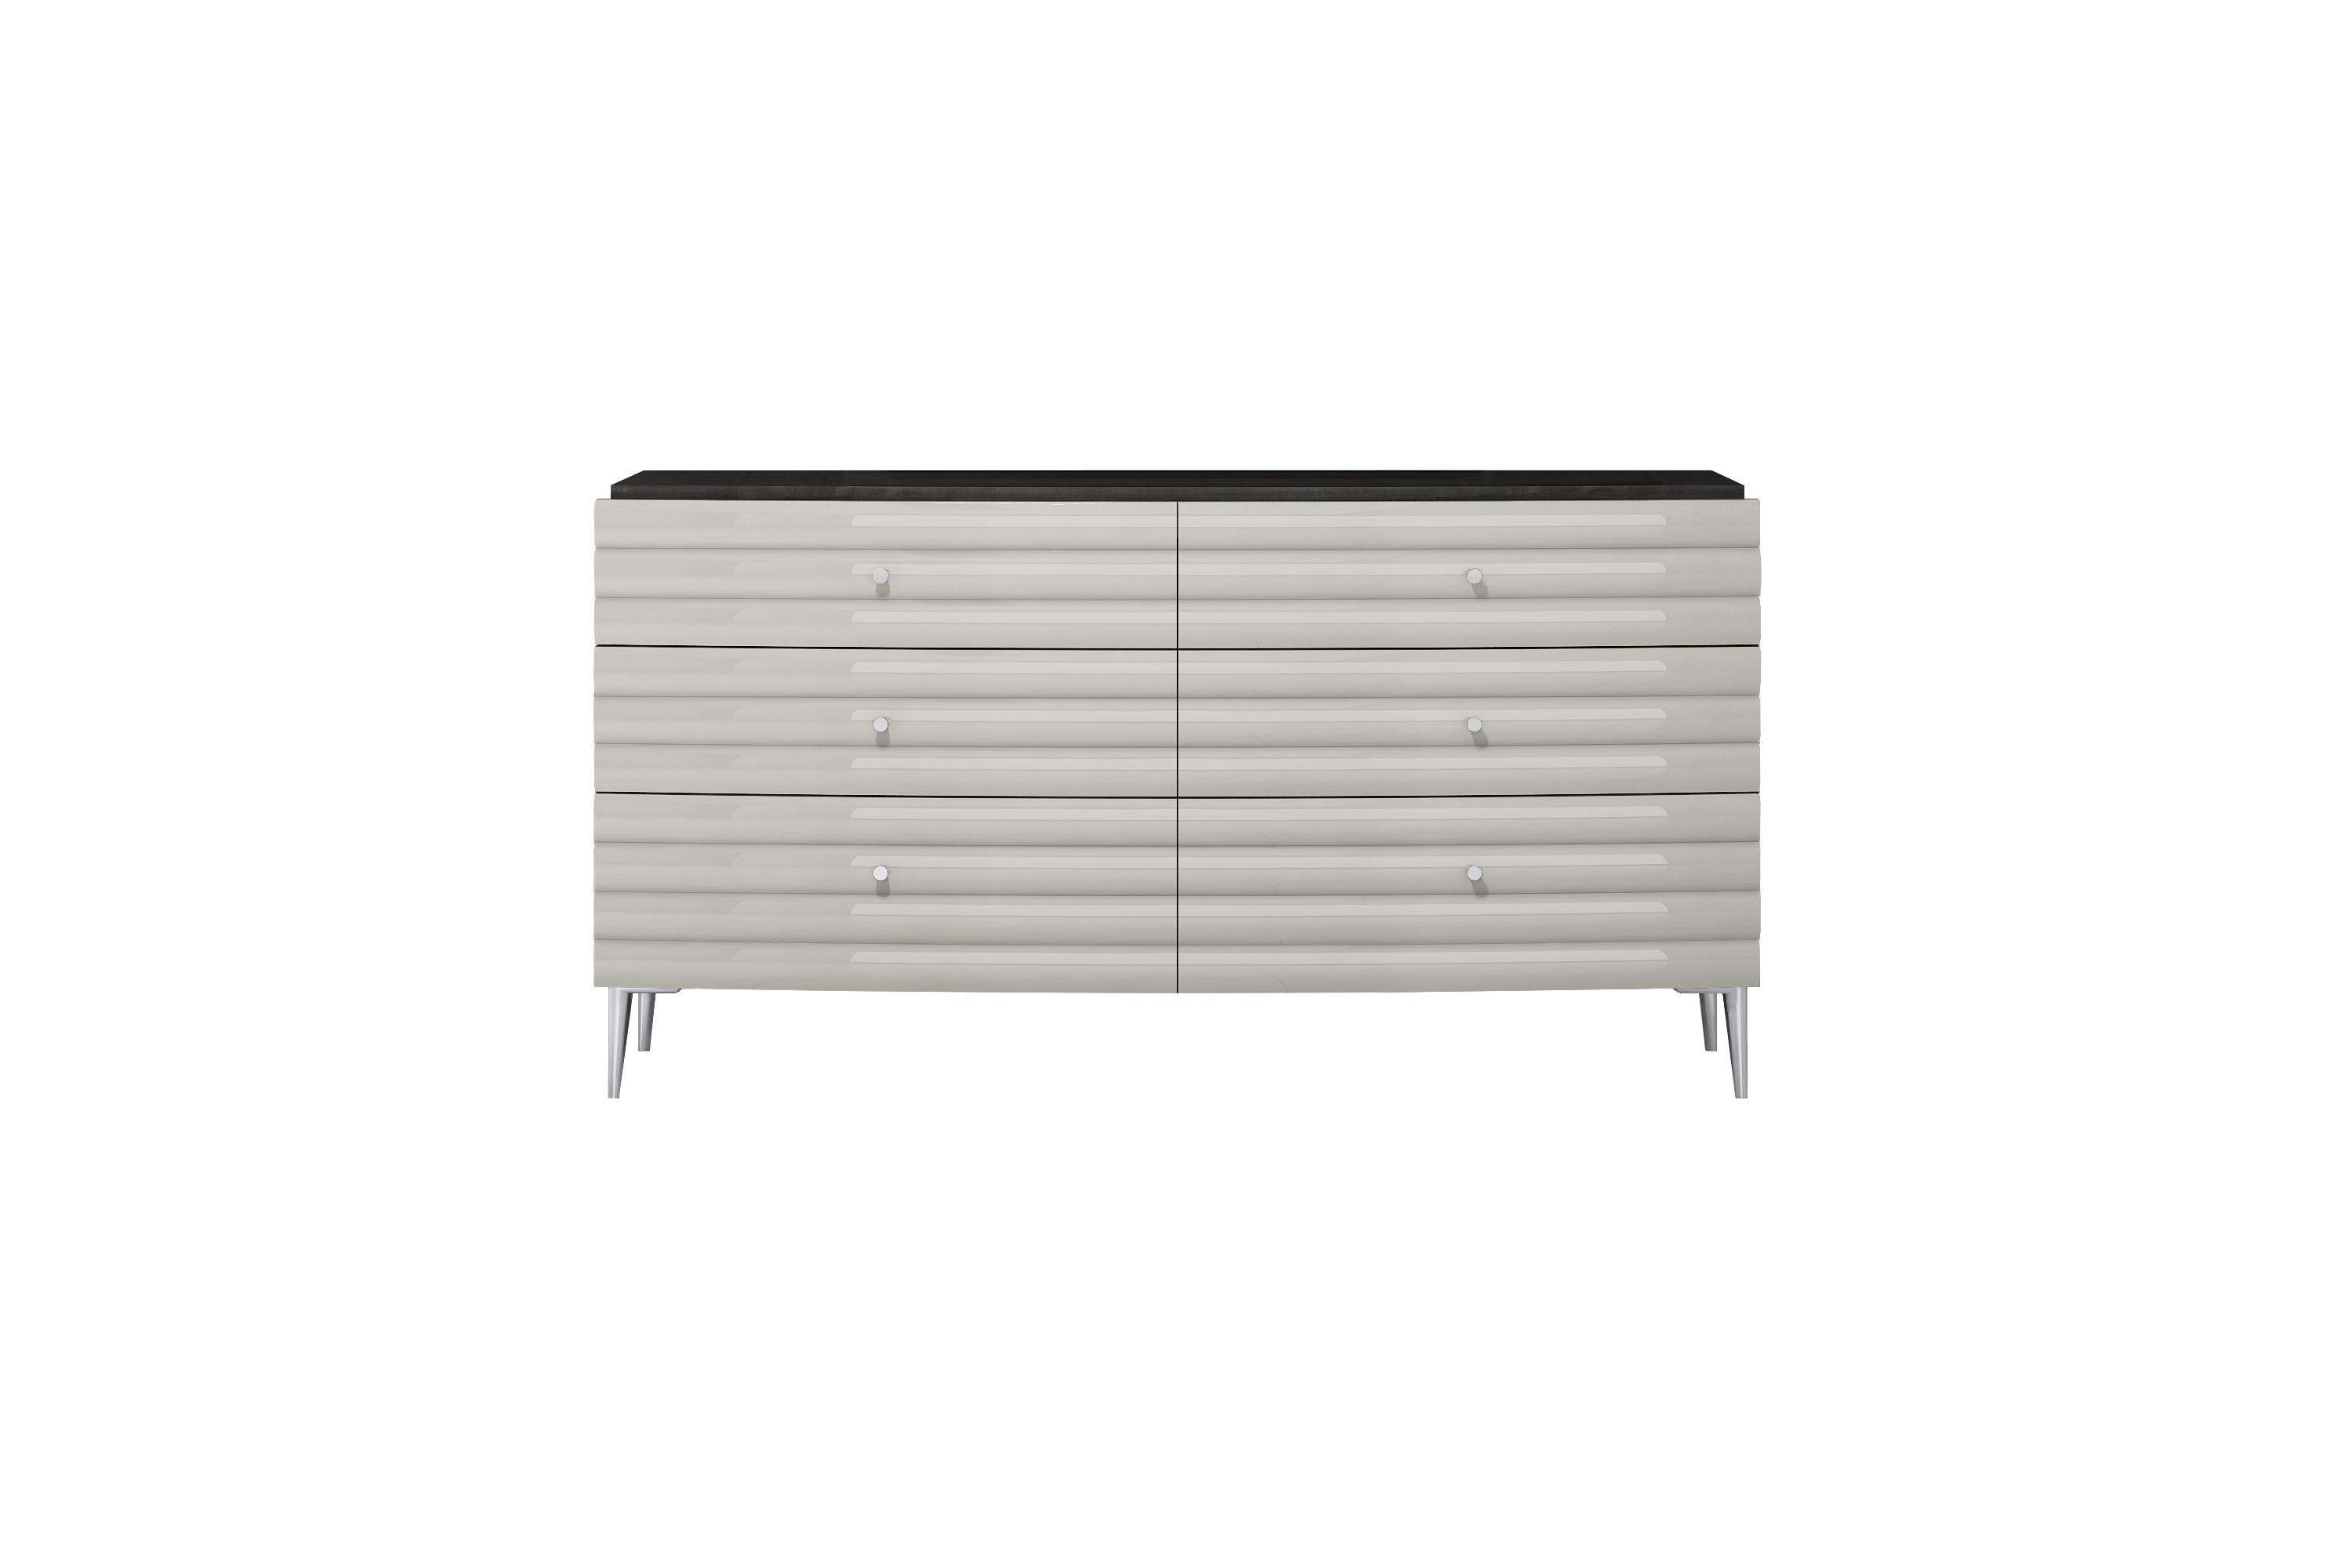 Contemporary Dresser DR1752-DGRY/LGRY Pino DR1752-DGRY/LGRY in Dark Gray 